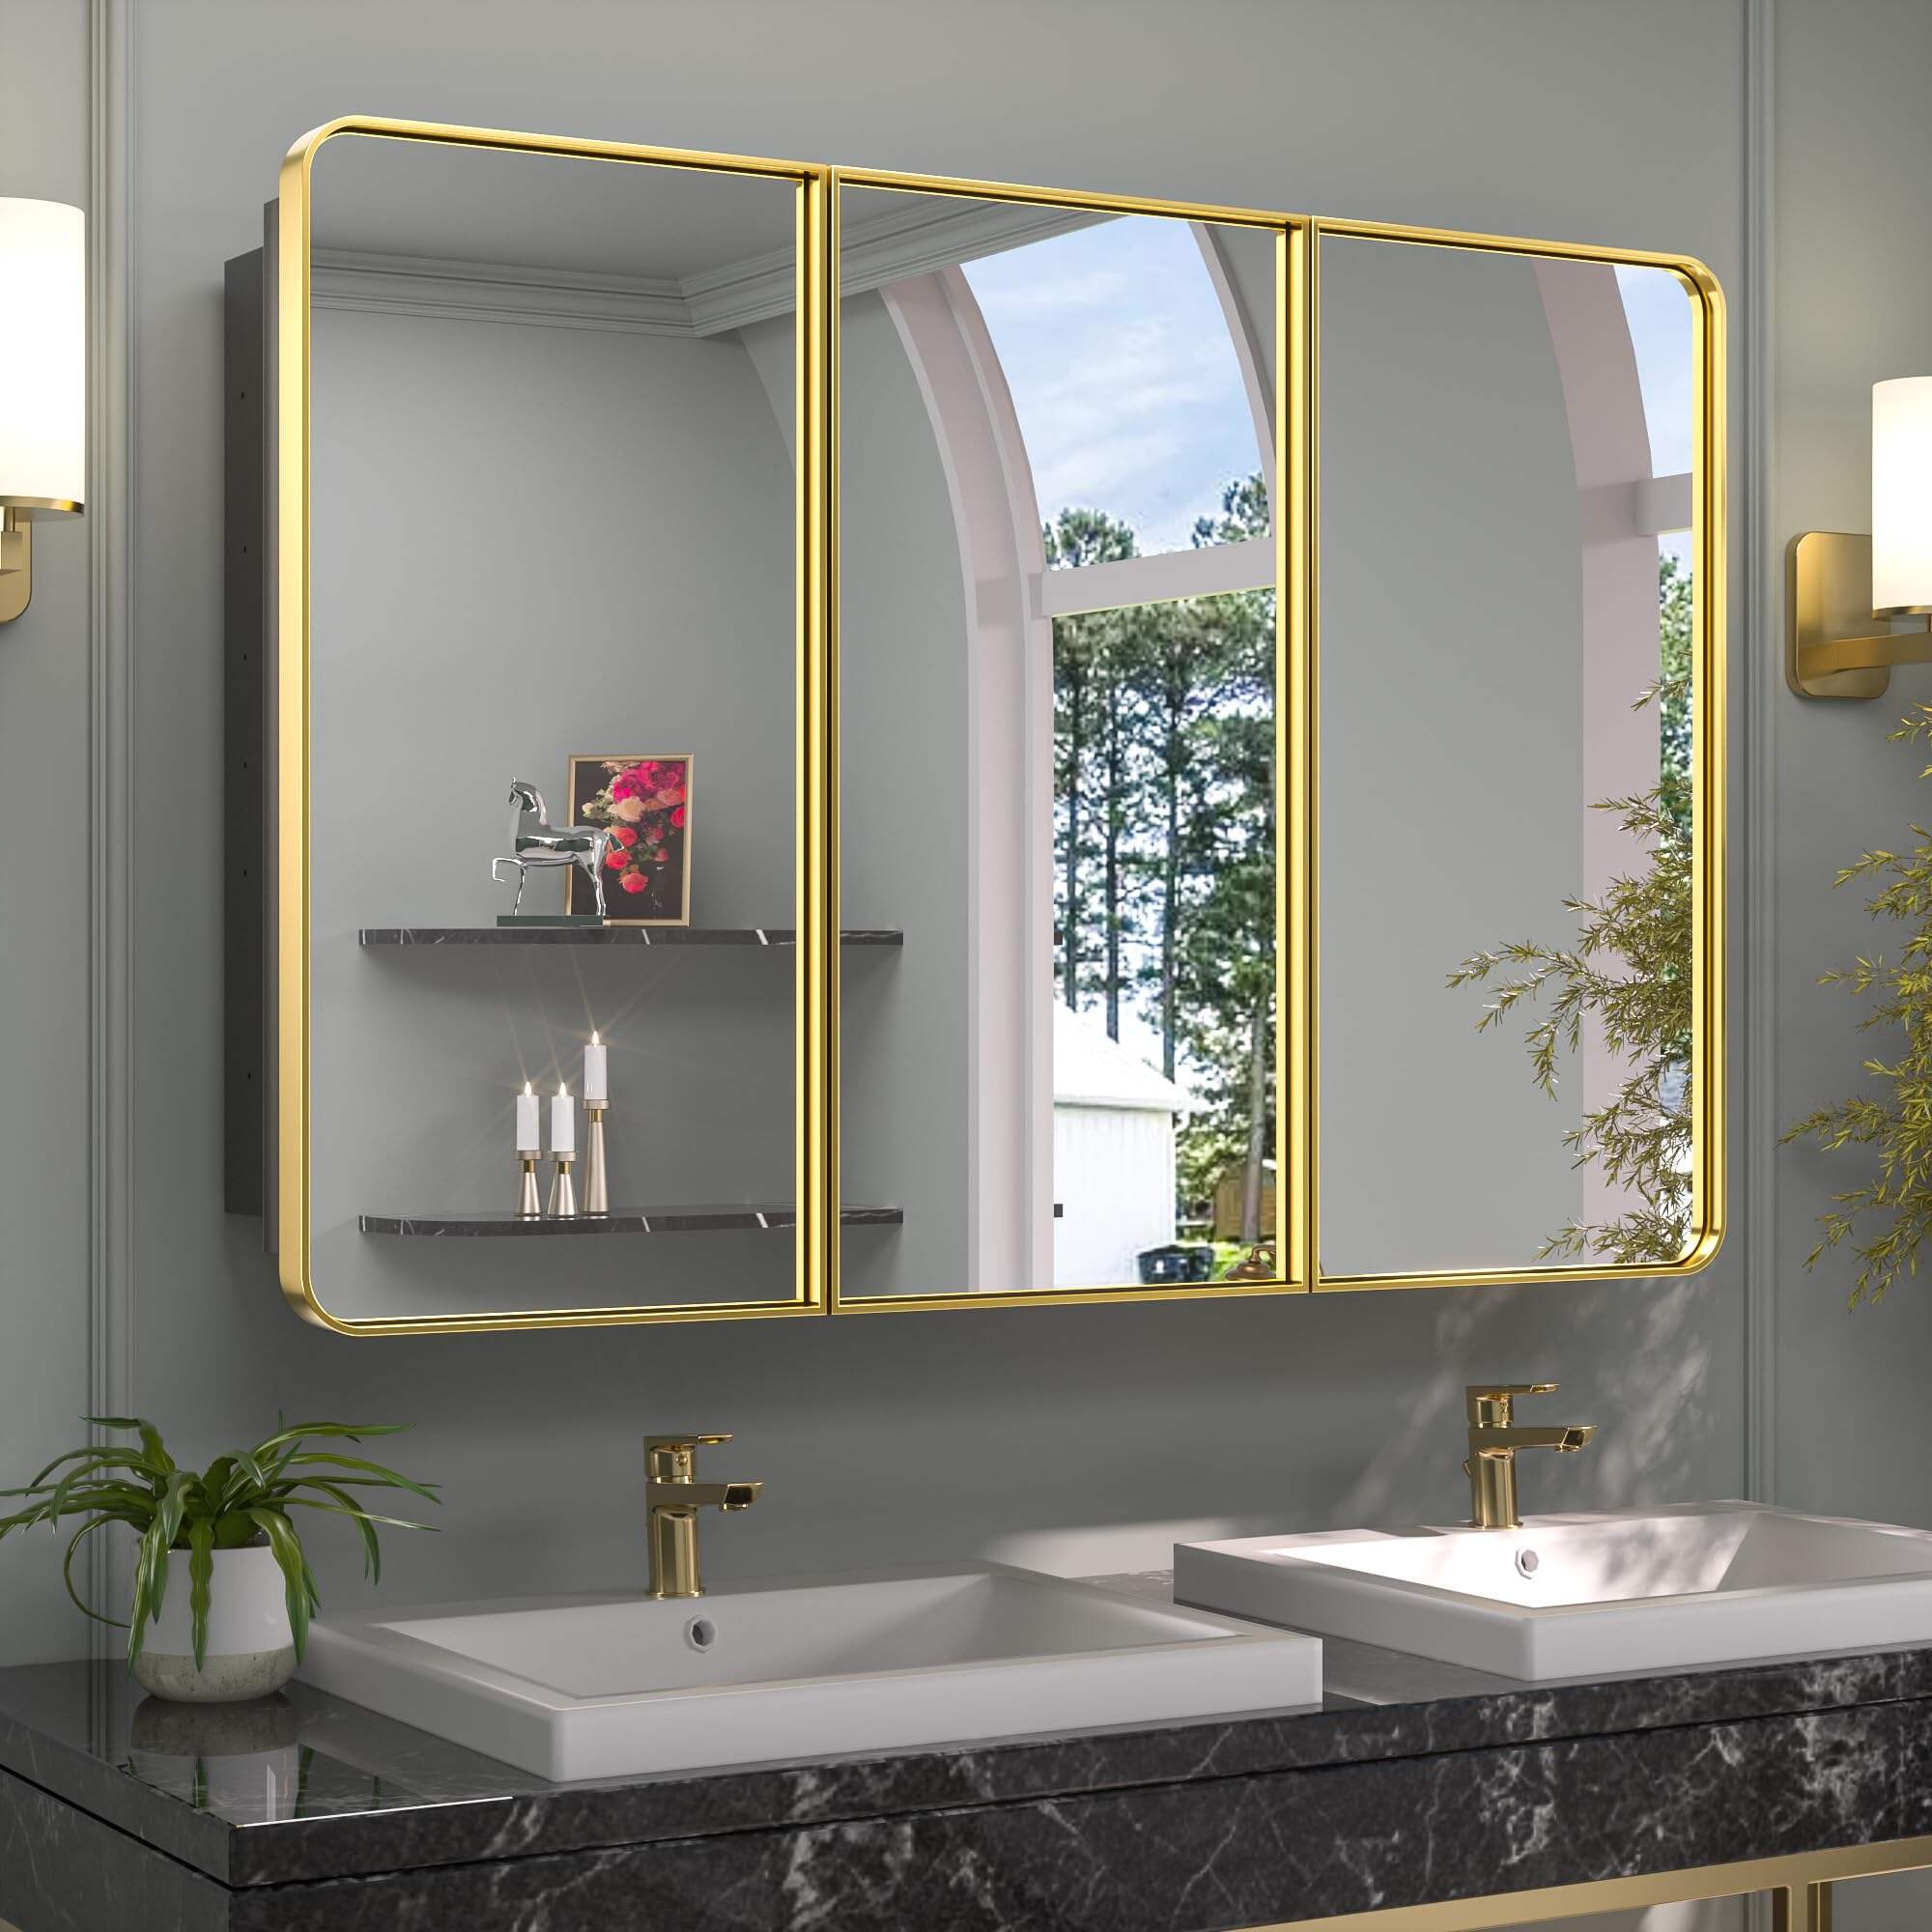 JJGullit bathroom mirror supplier .48 x 32 Inch Gold Medicine Cabinets for Bathroom with Mirror Adjustable Shelves 3 Doors Stainless Steel Frame Soft Closing Hinge Large Recessed Wall Mounted Metal Mirrored Storage